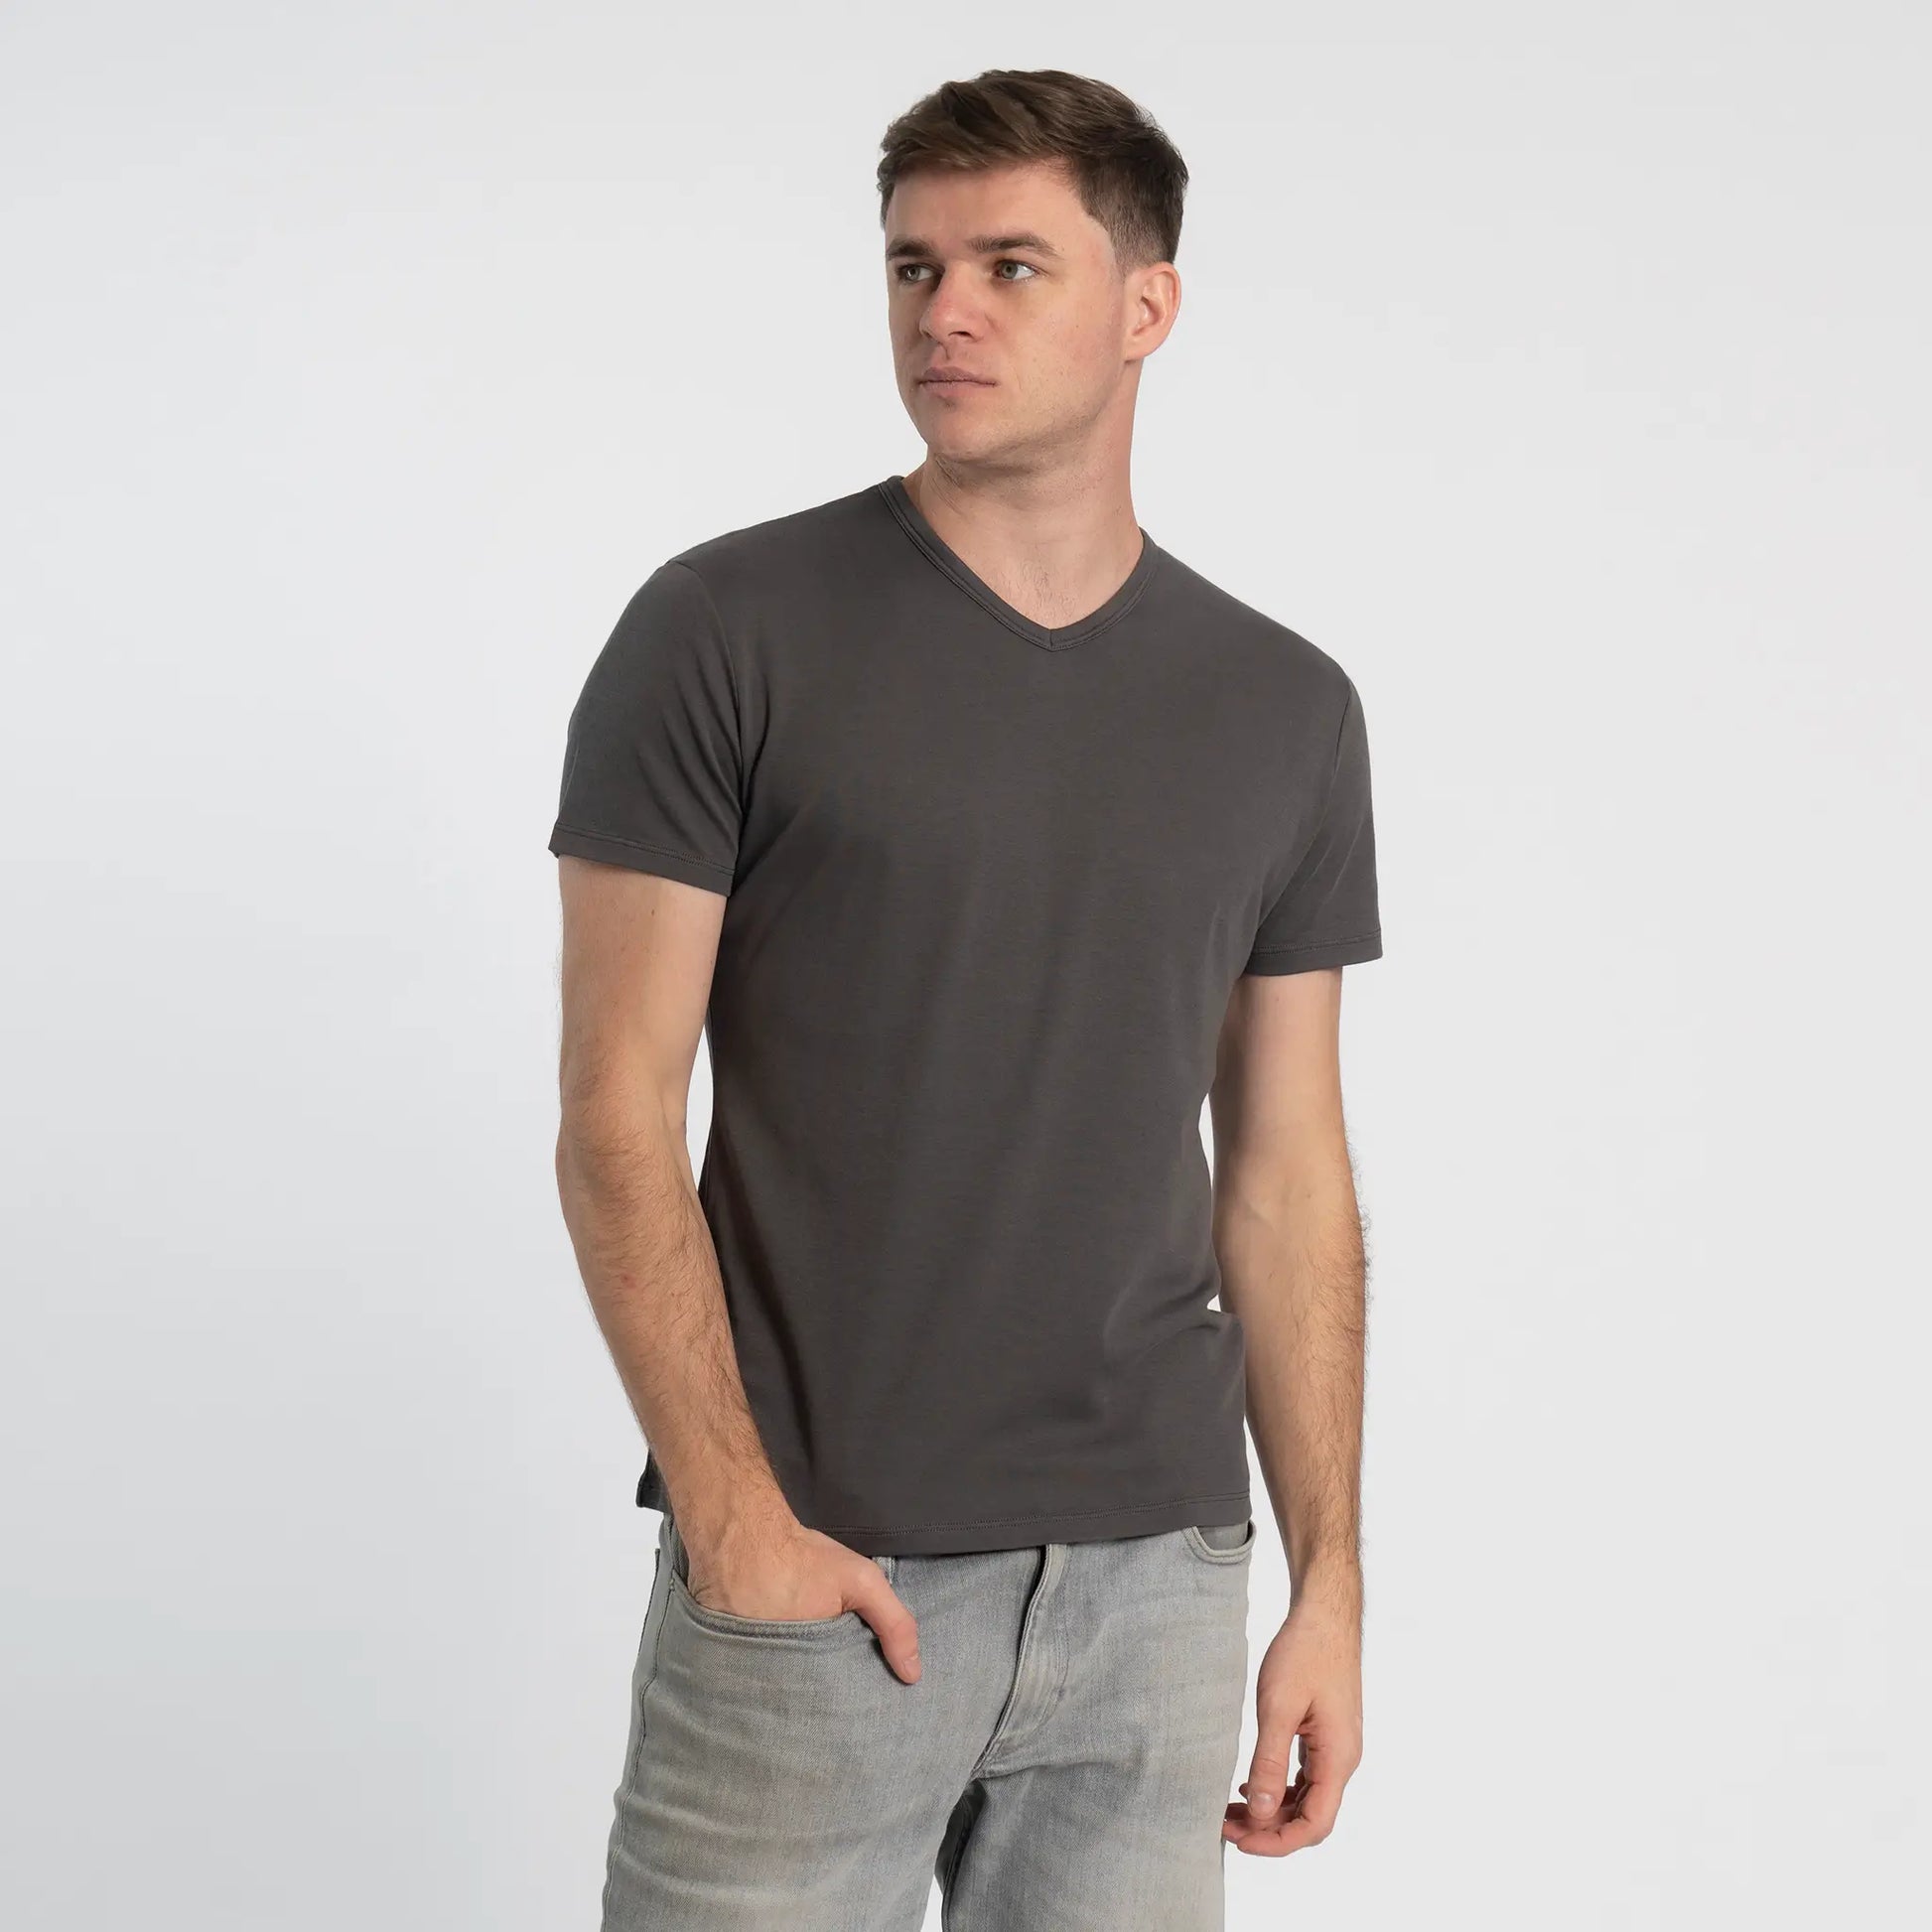 mens sustainable tshirt vneck color gray